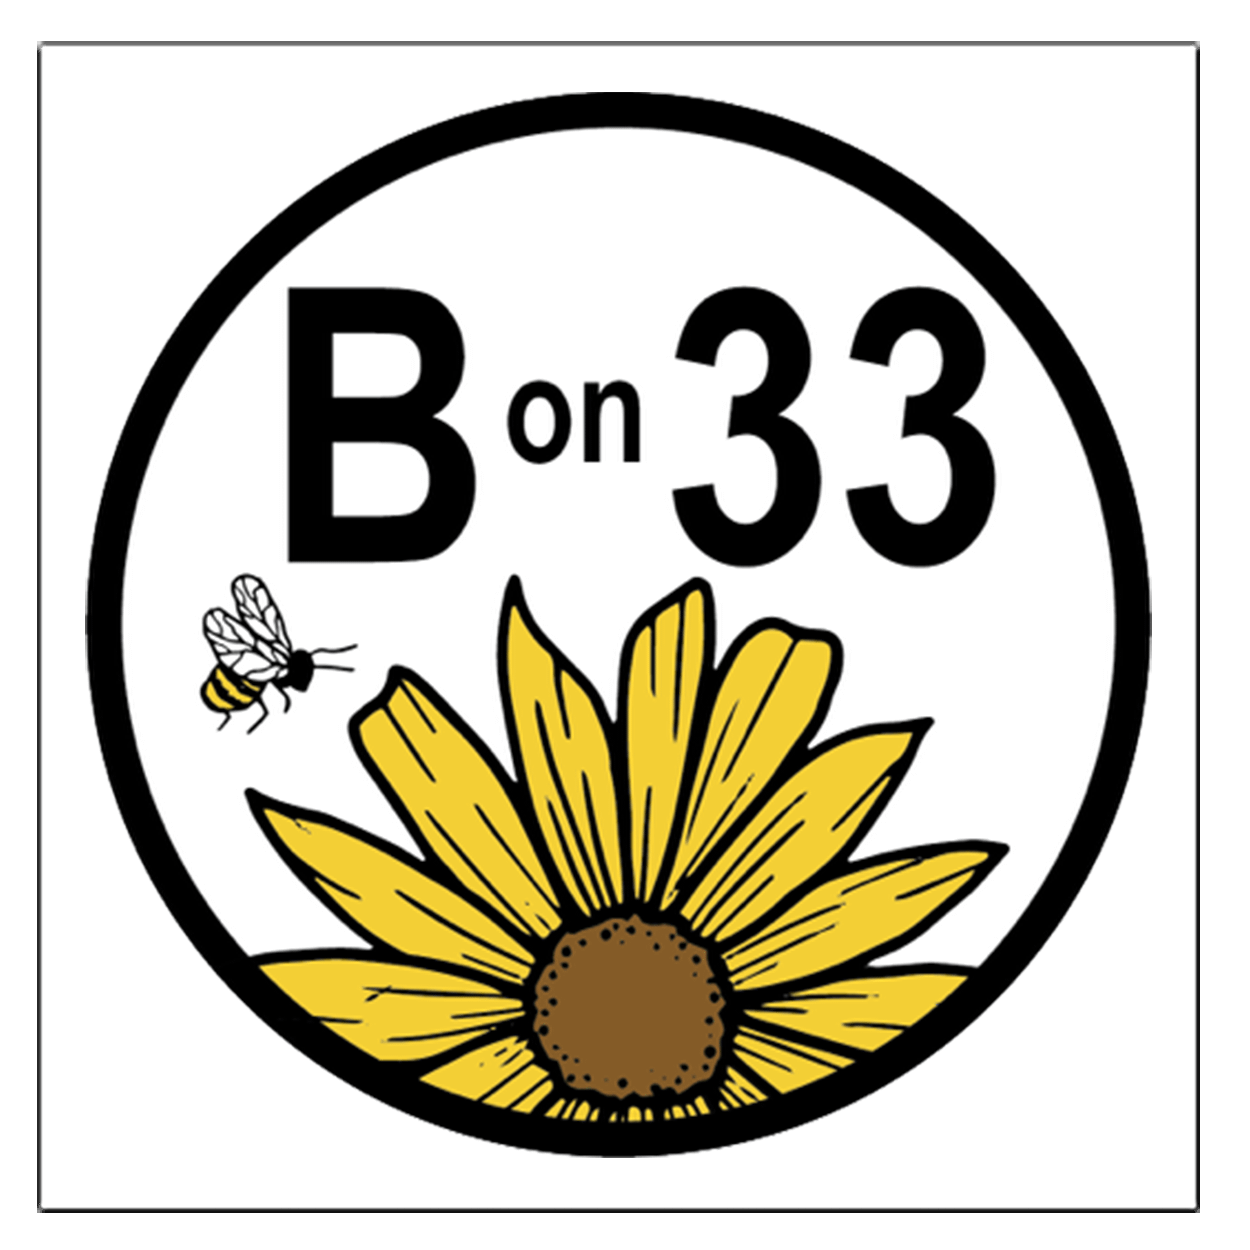 B on 33: Beautifying Our Byways